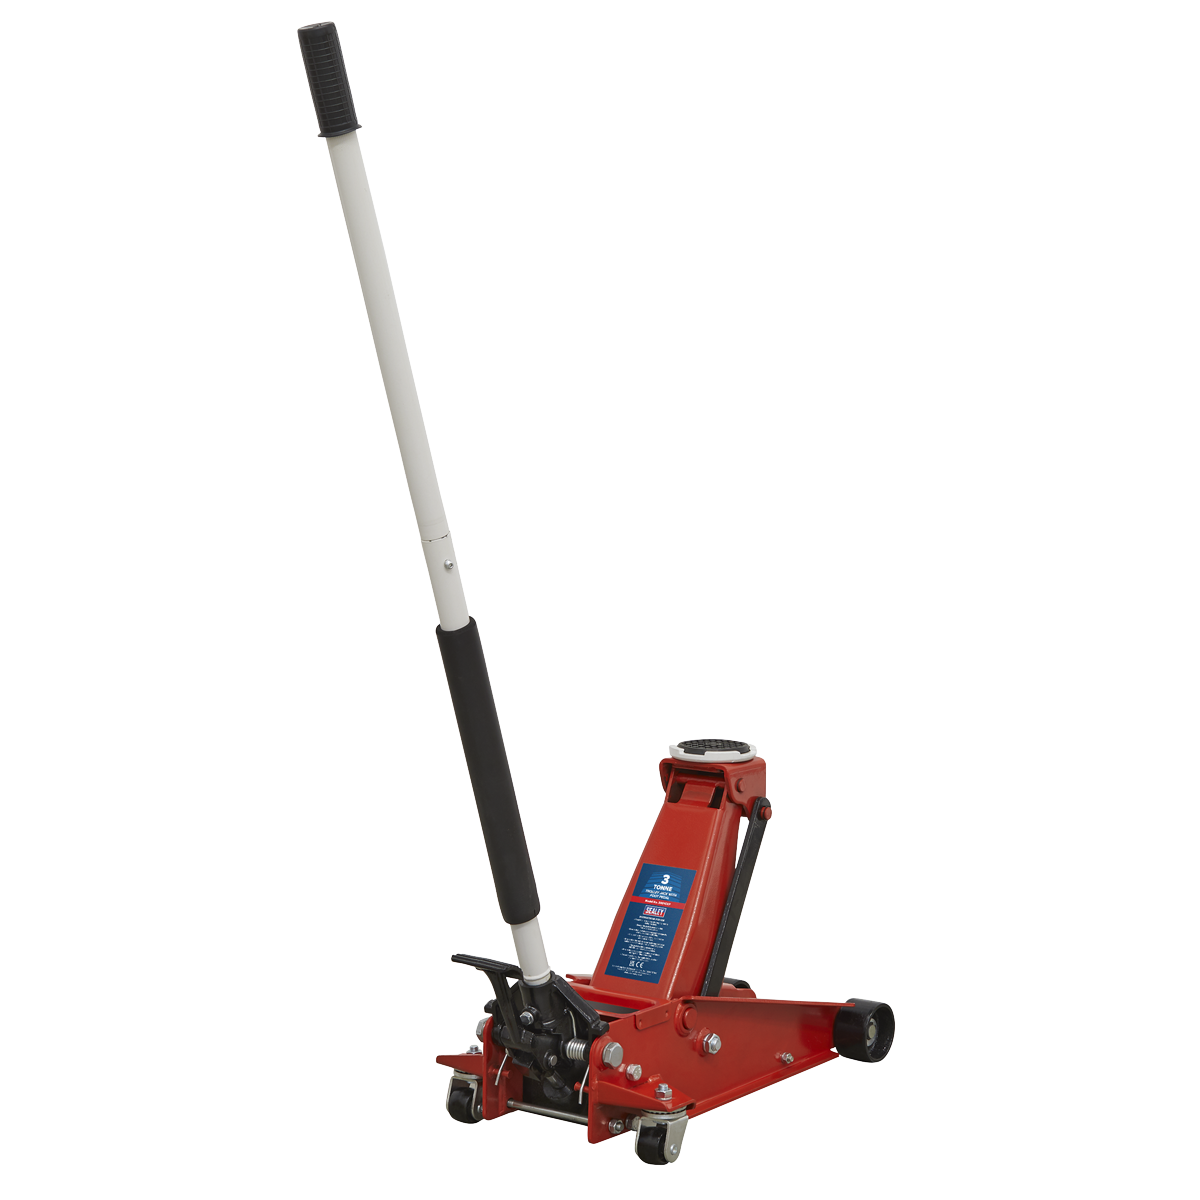 Sealey 3tonne Trolley Jack with Foot Pedal 3001CXP